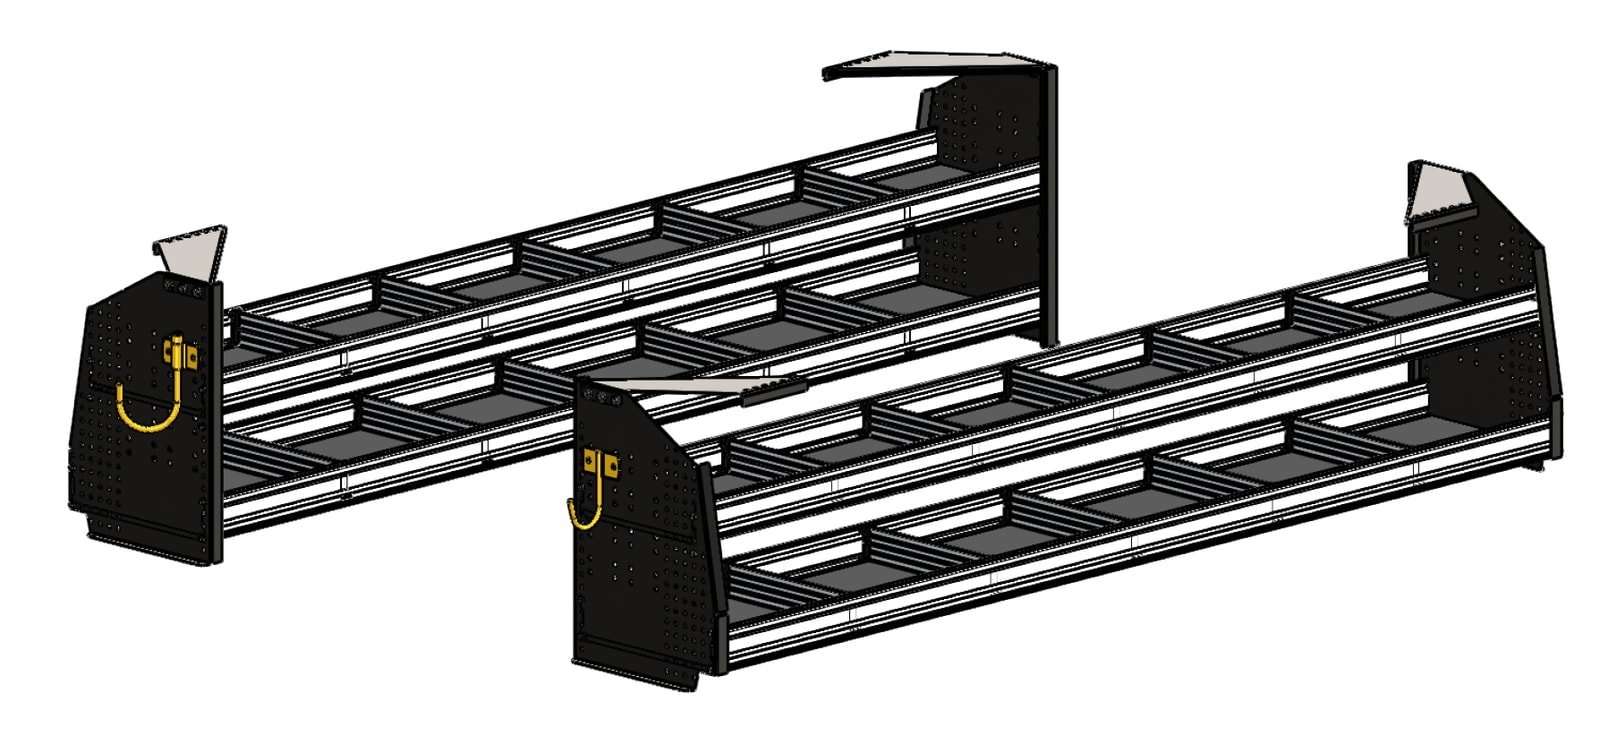 QSP for Contractors Ranger shelving solutions for the Compak service body - 2 strong shelves (15" and 10" deep) on each side and 2 hooks